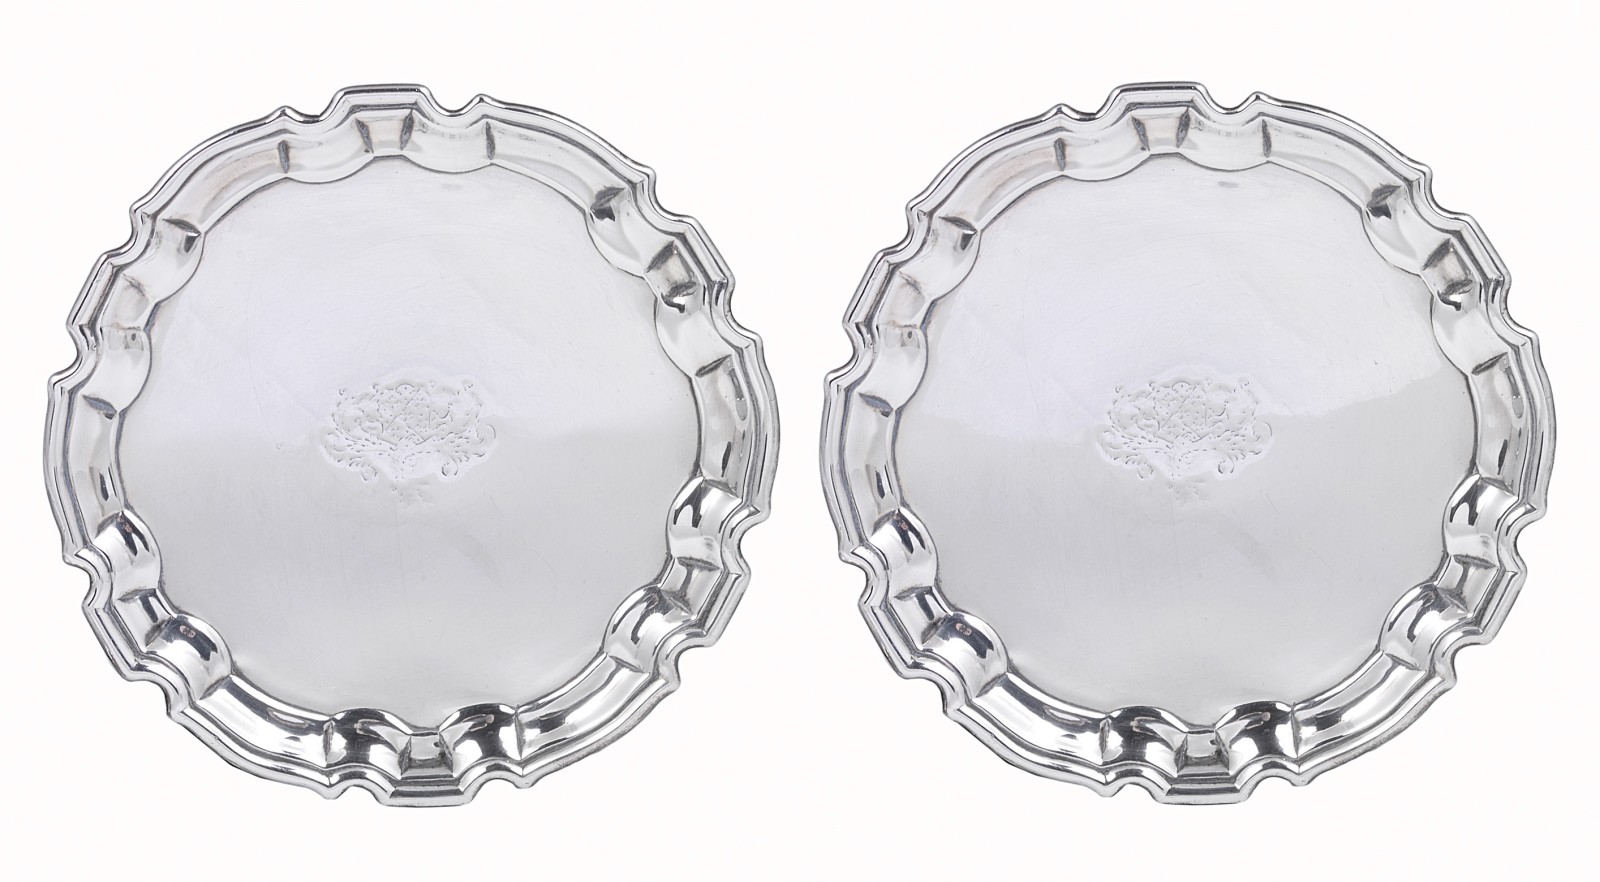 A PAIR OF GEORGE II SILVER WAITERS, JOHN TUITE, LONDON, 1740 shaped circular, later engraved with